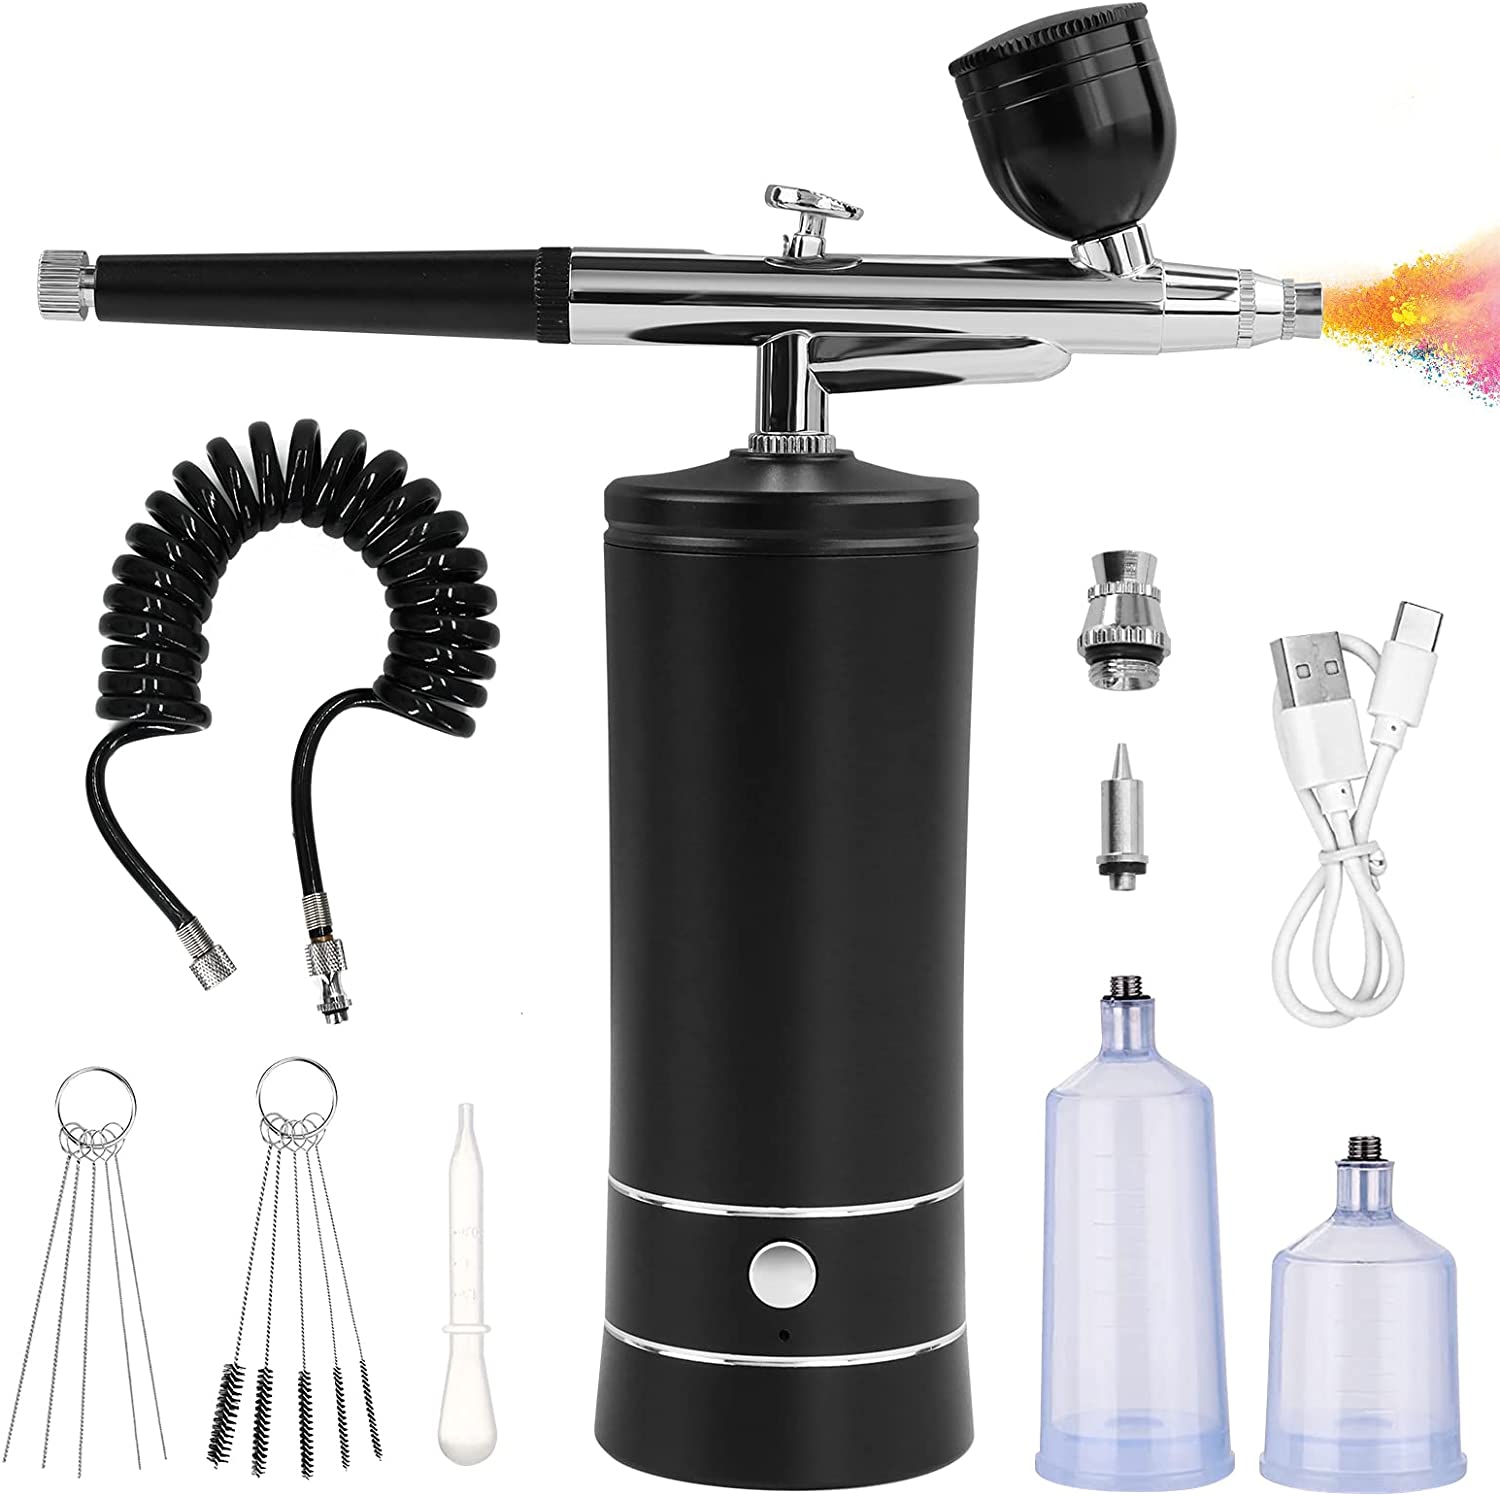  Airbrush Kit with Compressor, Miaphie Air Brush